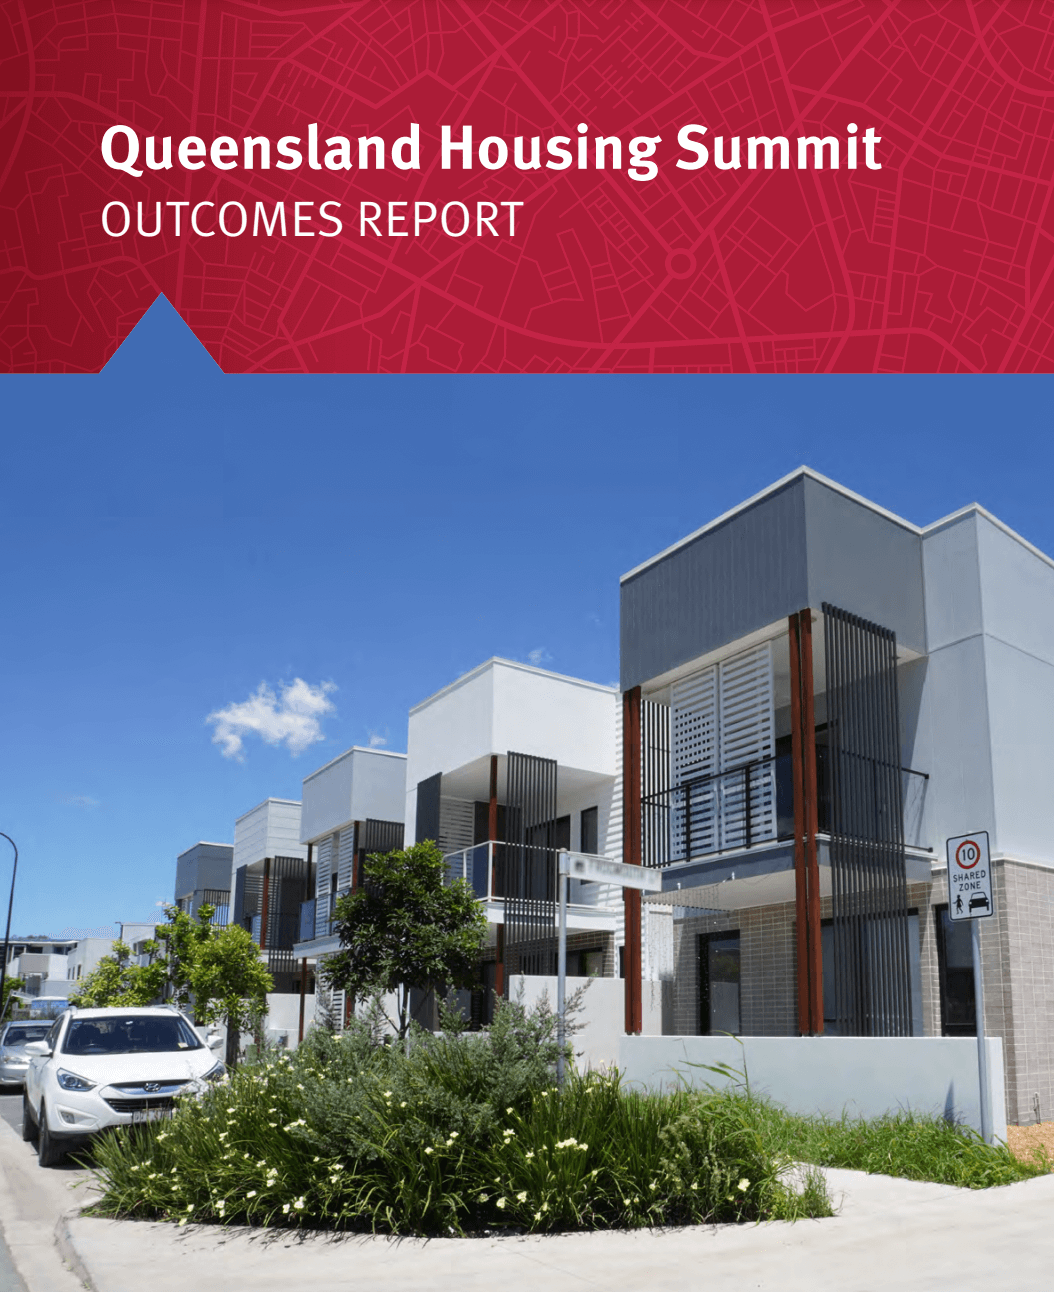 Housing Summit Outcomes Released